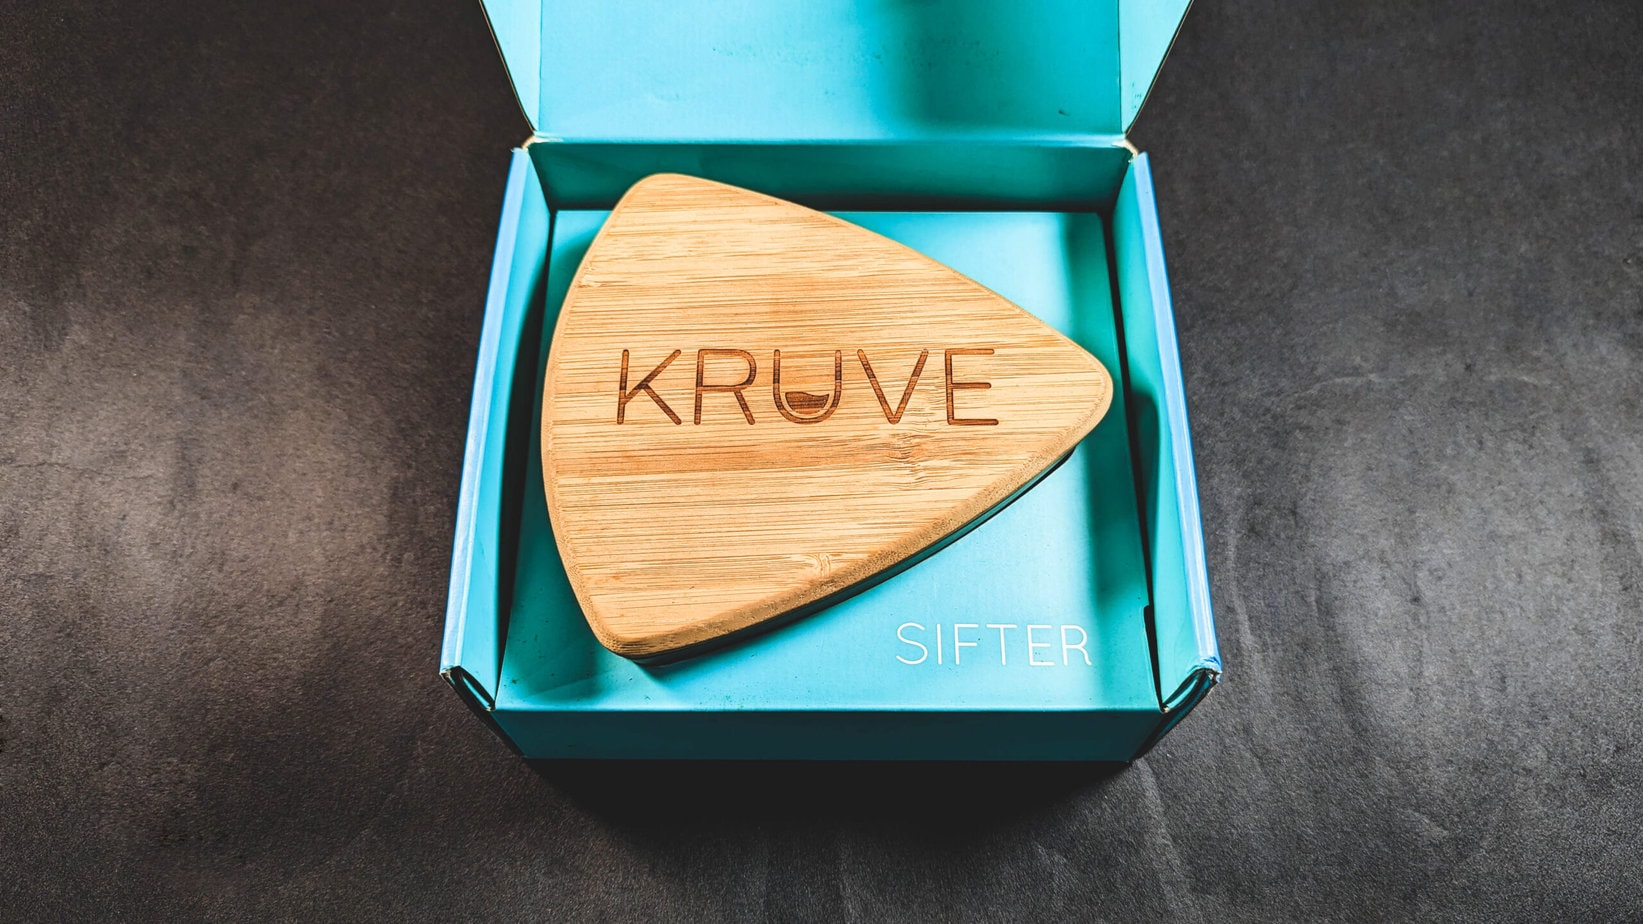 Kruve Sifter in a blue box